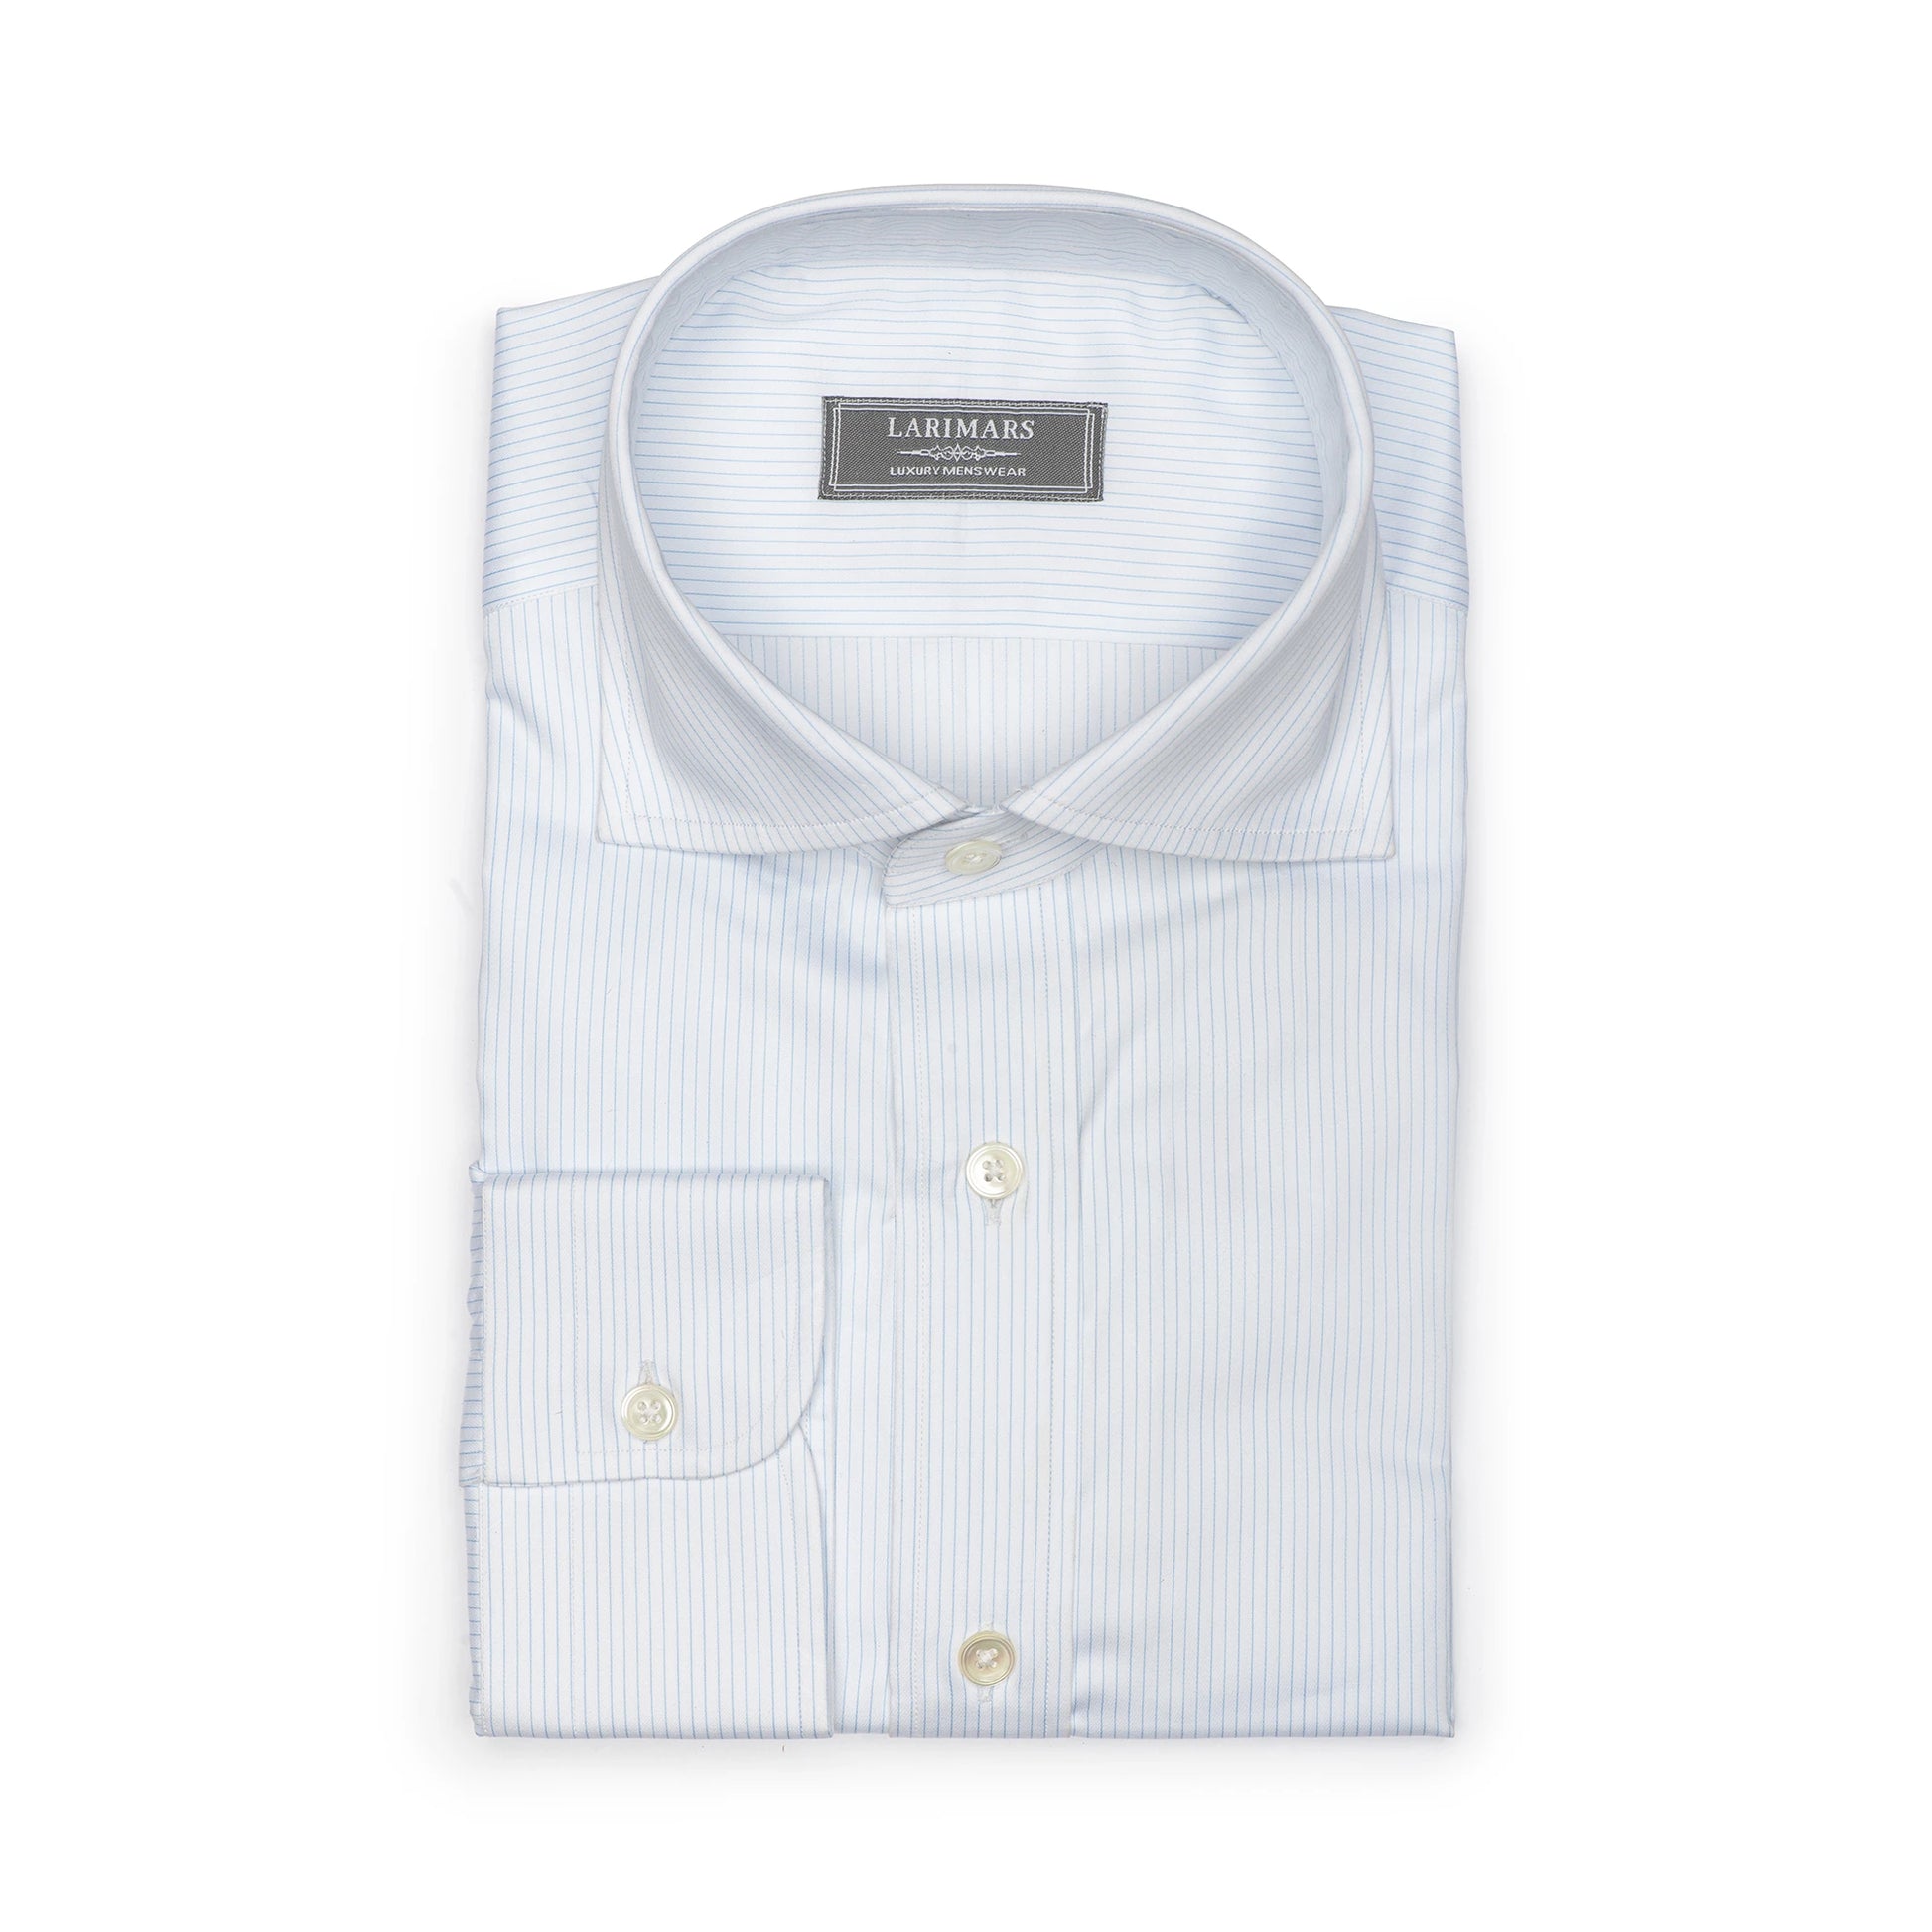 Blue Pencil Stripe - Larimars Clothing Men's Formal and casual wear shirts